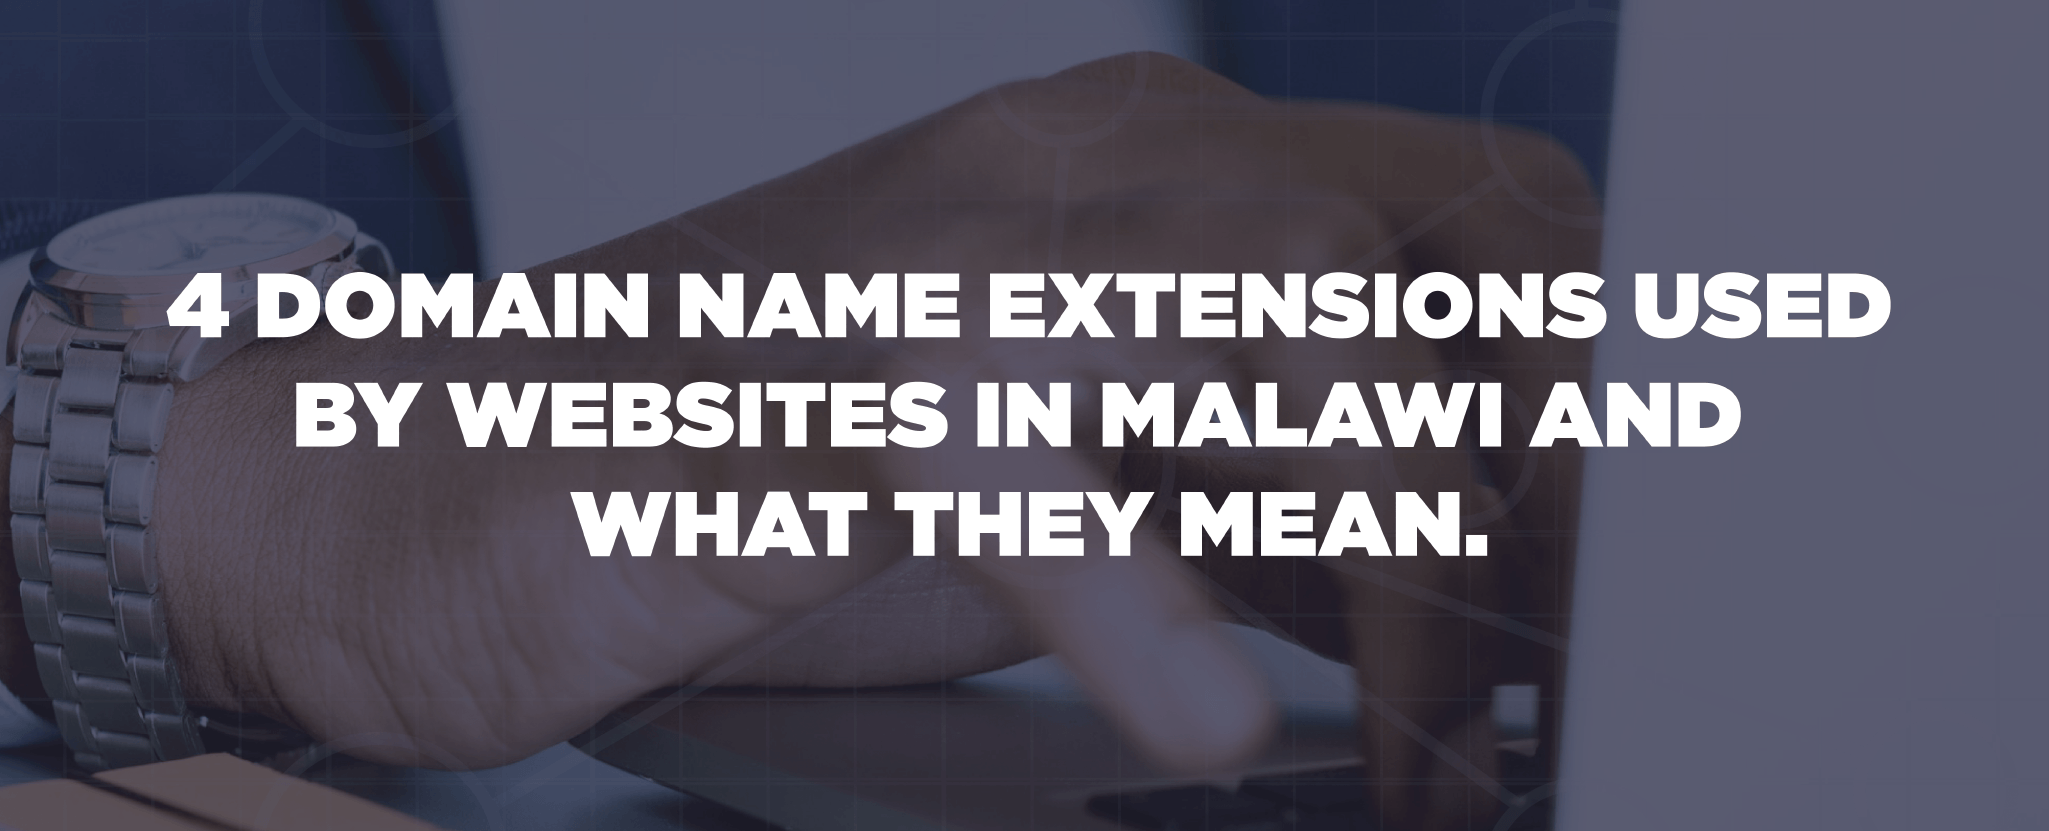 4 DOMAIN NAME EXTENSIONS USED BY WEBSITES IN MALAWI AND WHAT THEY MEAN